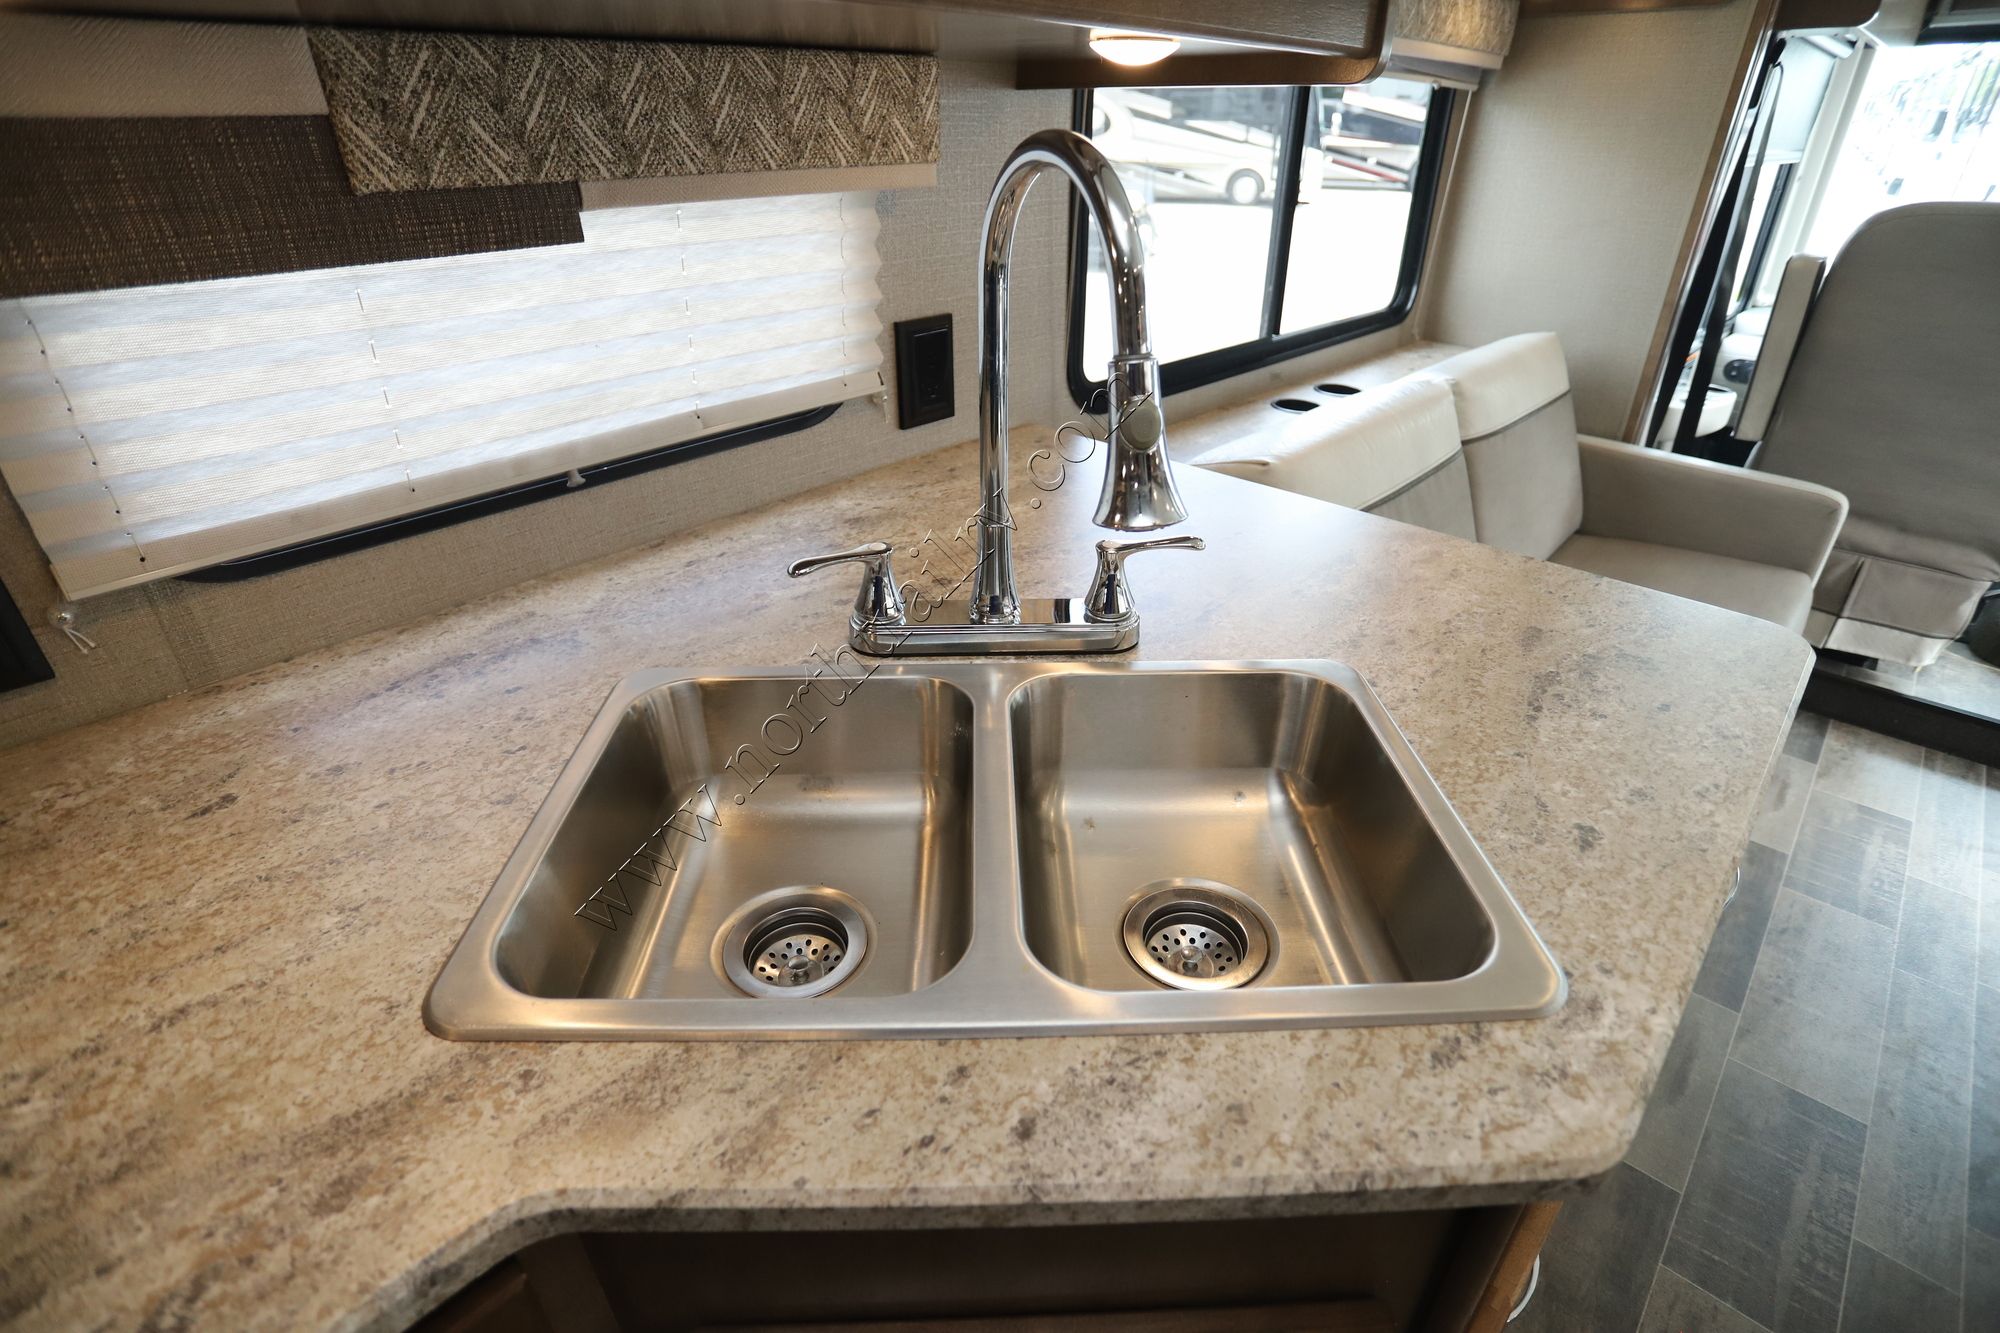 Used 2018 Winnebago Intent 29L Class A  For Sale